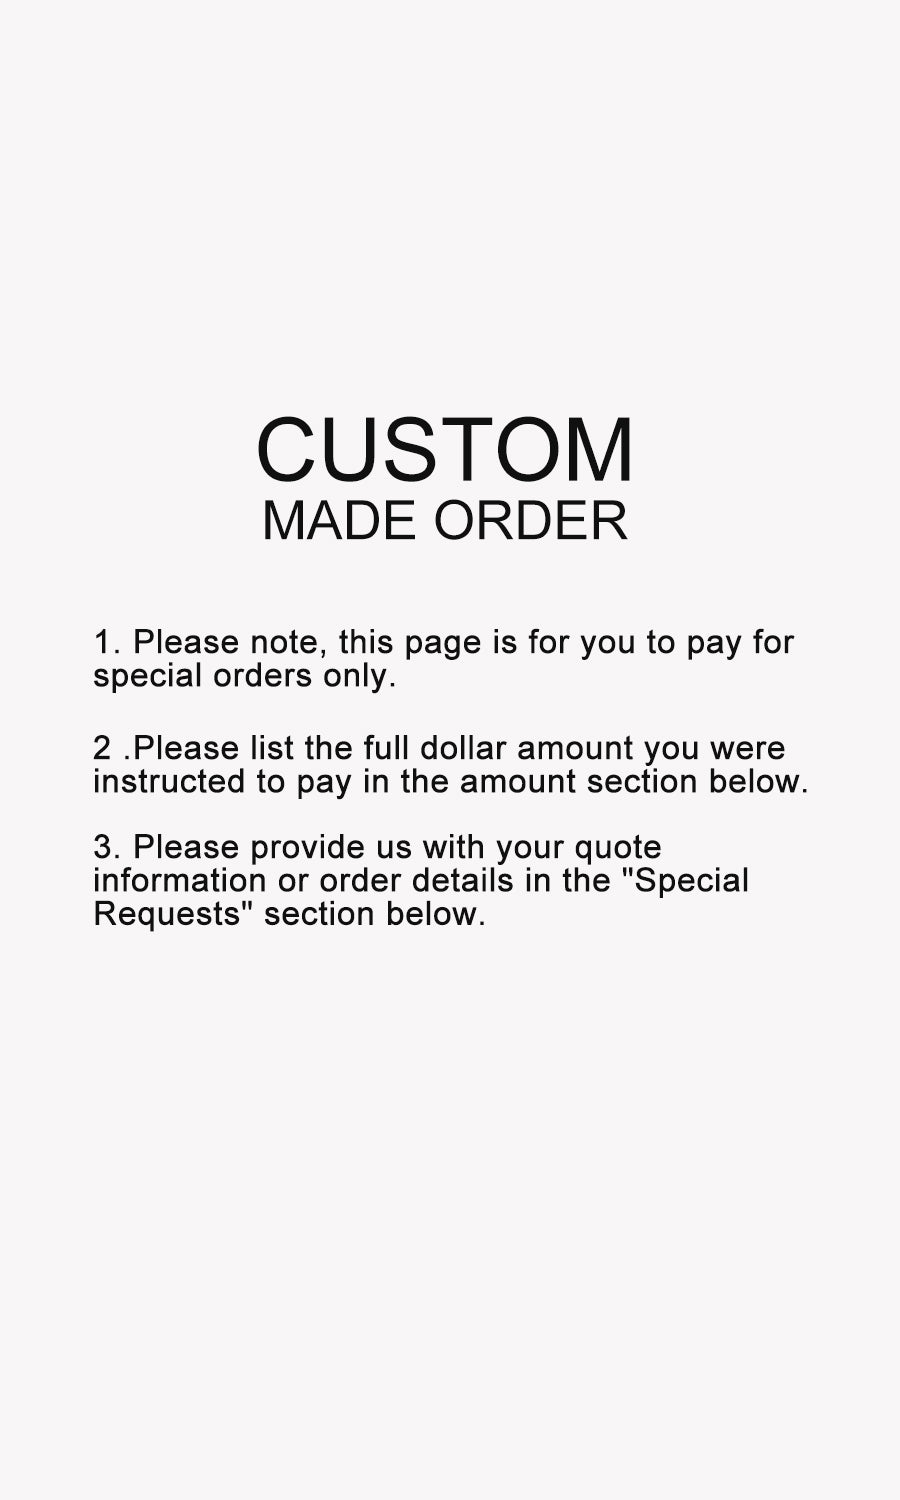 Sample Charge5 (Pay after confirm with the customer service)